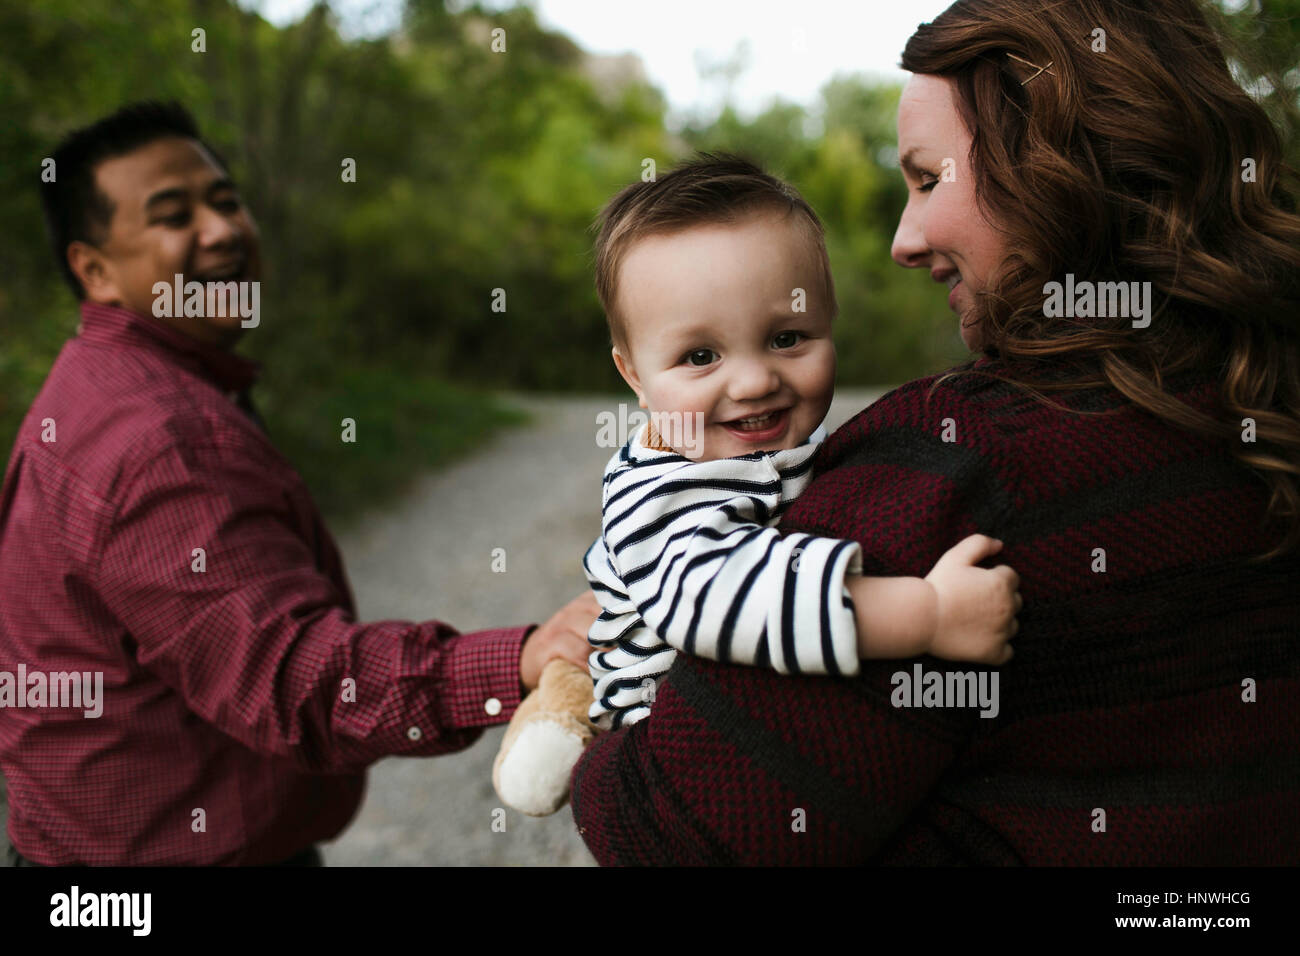 Baby Boy in mother's arms looking at camera smiling Banque D'Images